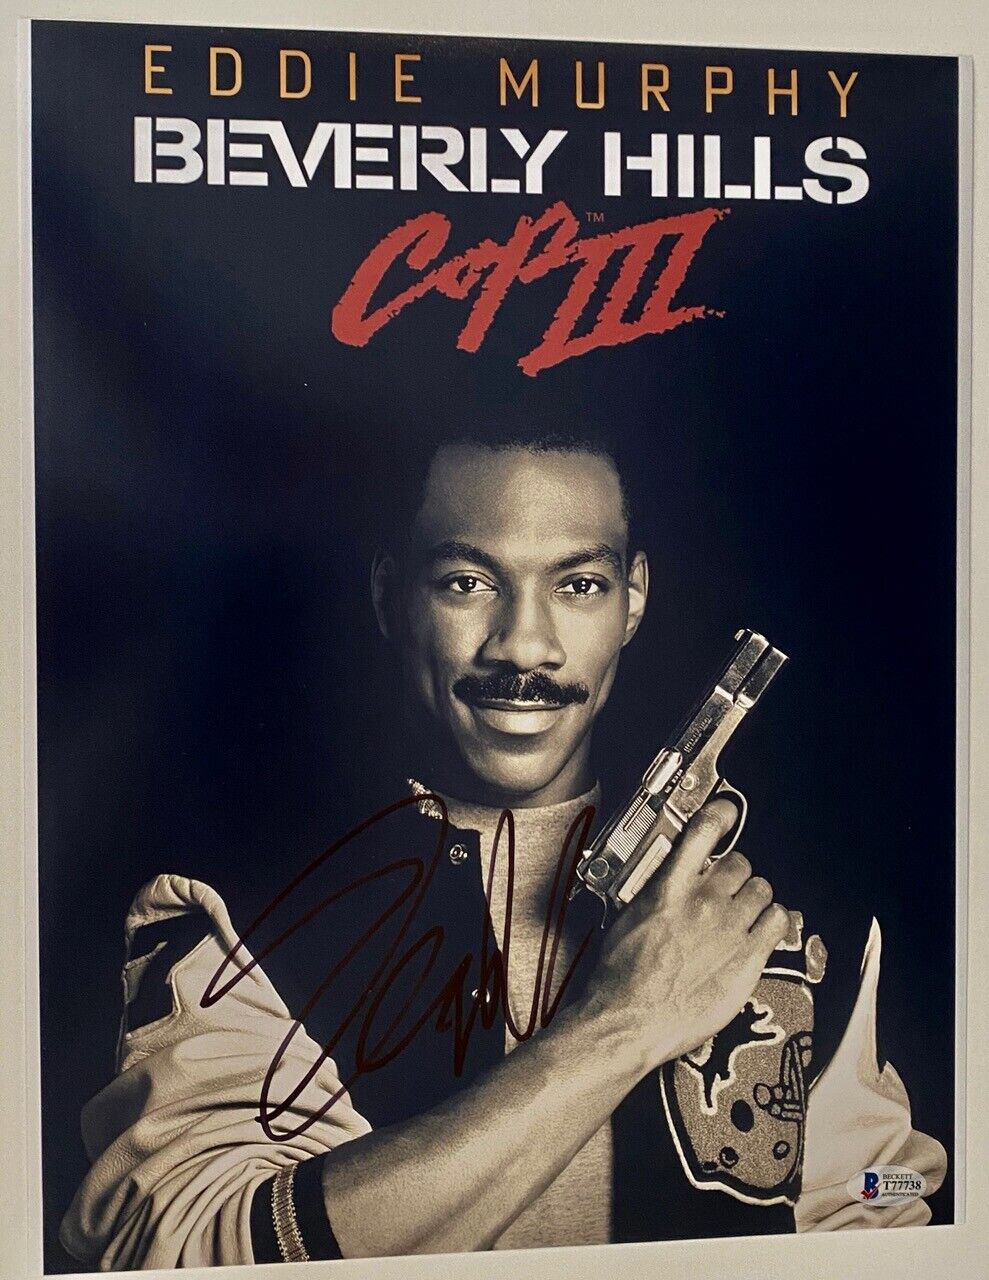 Eddie Murphy Signed Autographed 11x14 Photo Poster painting BEVERLY HILLS COP 3 Beckett BAS COA